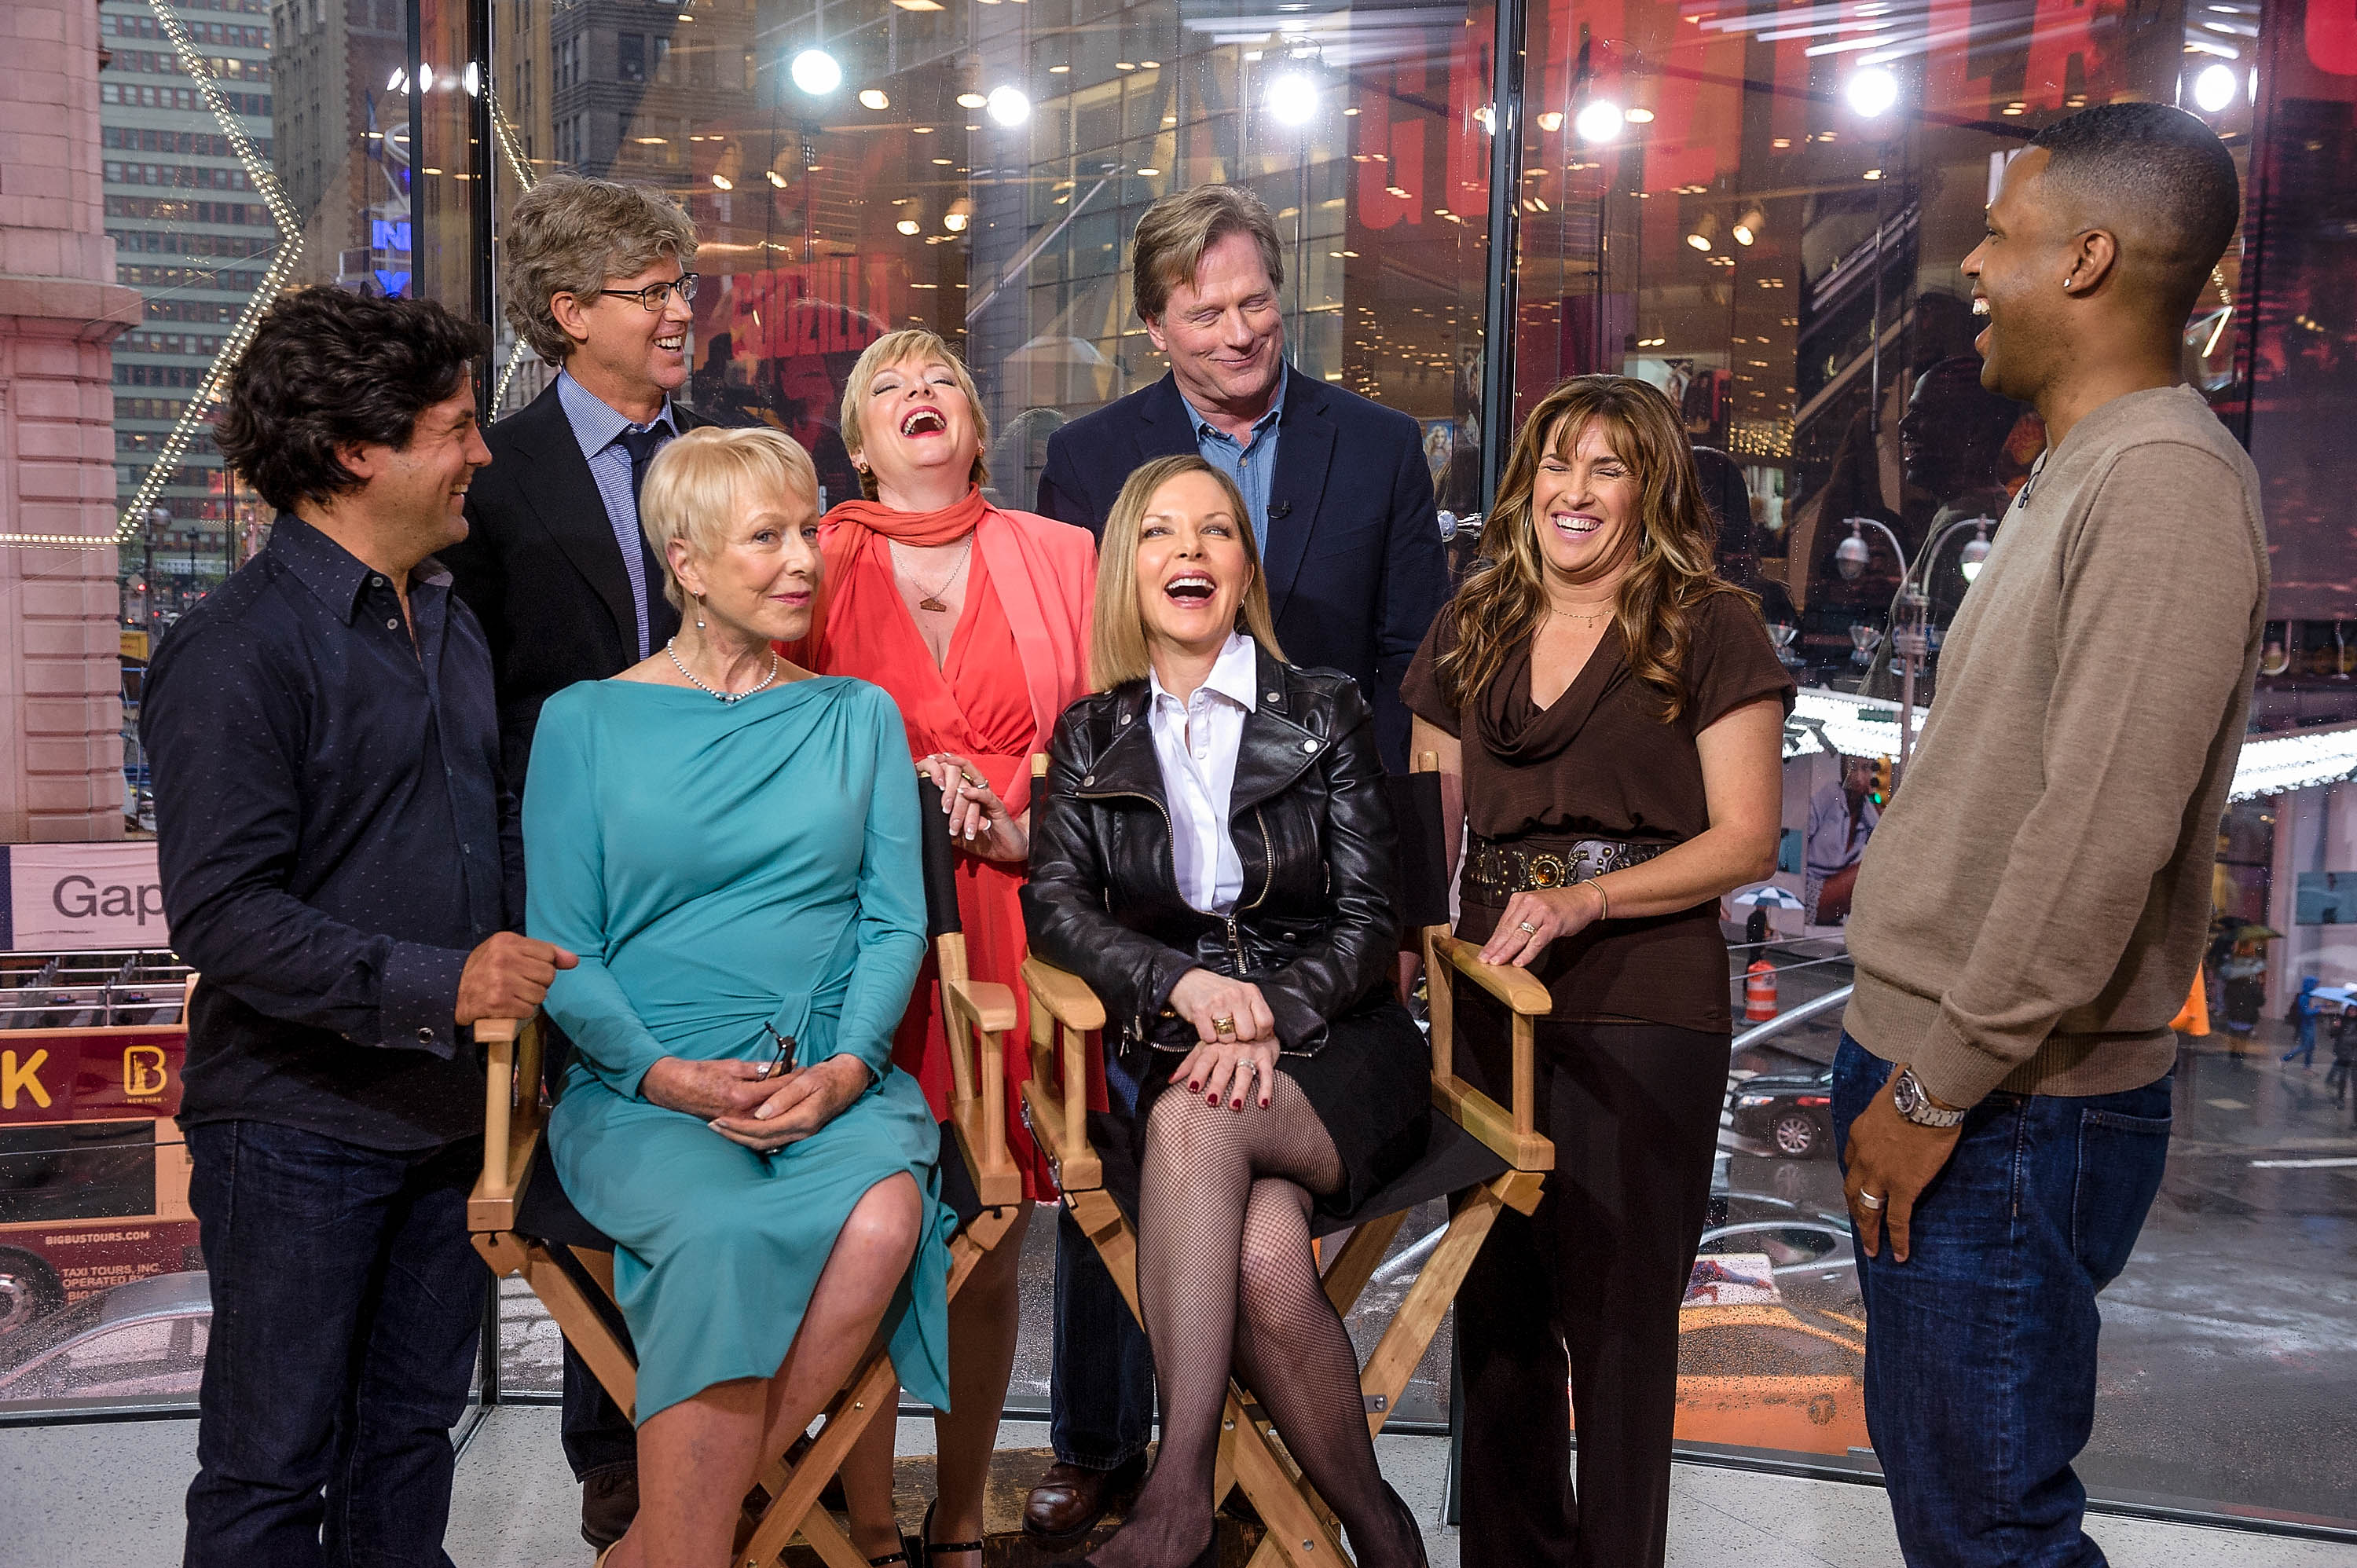 Pictured: (L-R standing) Matthew Labyorteaux, Michael Landon, Jr., Alison Arngrim, Dean Butler, Lindsay Greenbush, (L-R seated) Karen Grassle, and Melissa Sue Anderson of "Little House on the Prairie" interviewed by AJ Calloway (R) during their visit to "Extra" at their New York studios at H&M in Times Square on April 30, 2014 in New York City. | Source: Getty Images